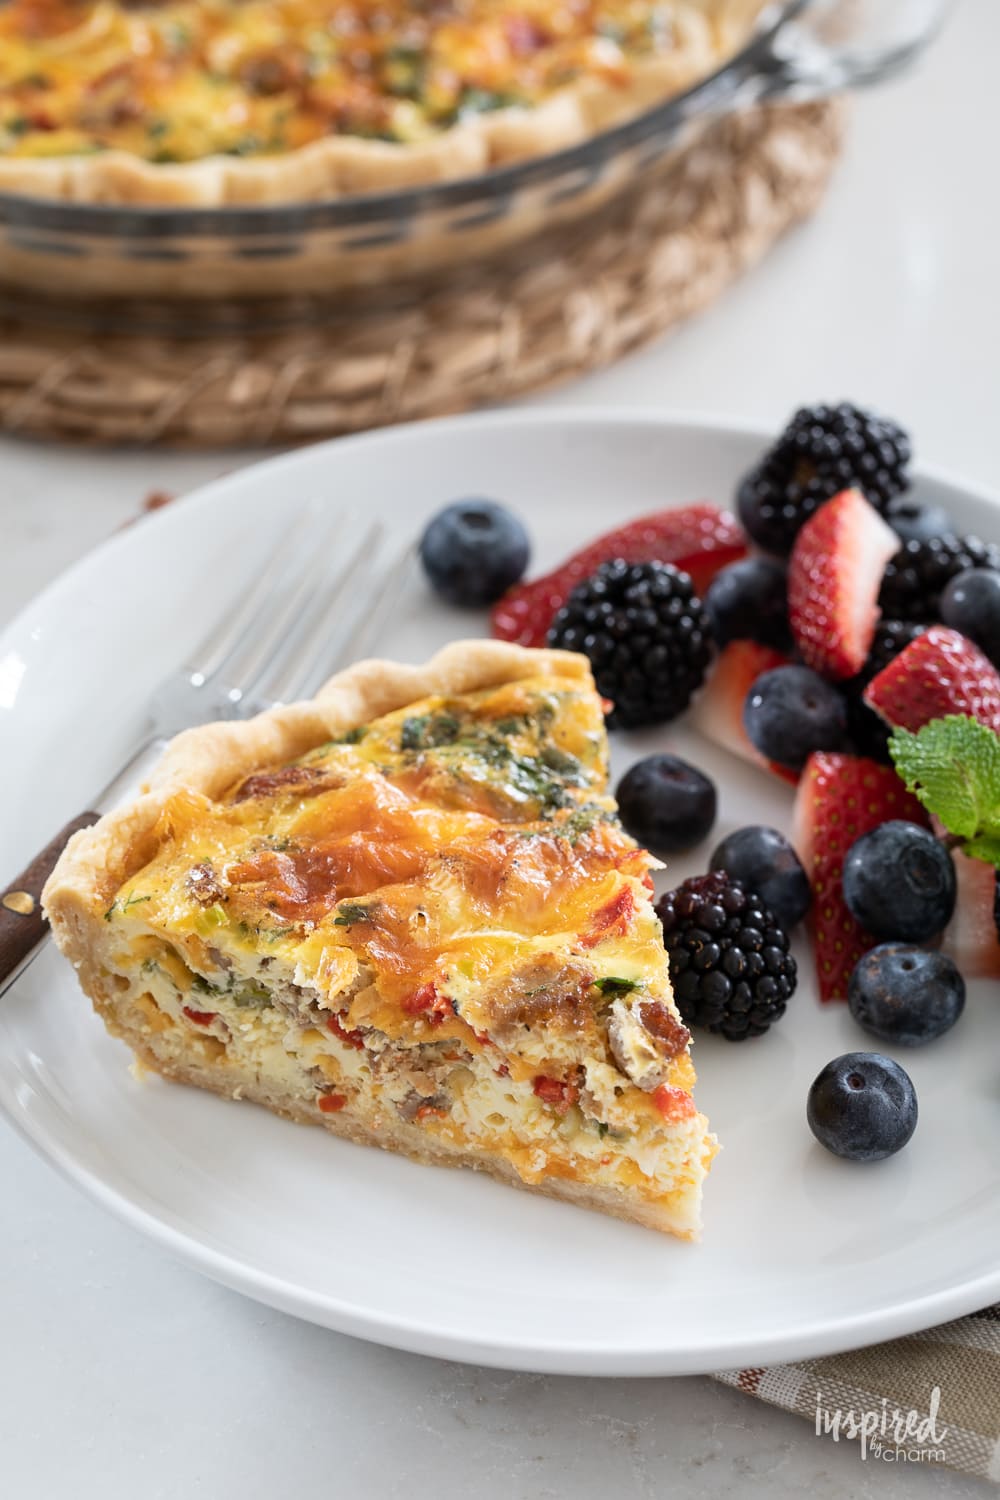 red pepper and sausage quiche on a plate with fresh berries.